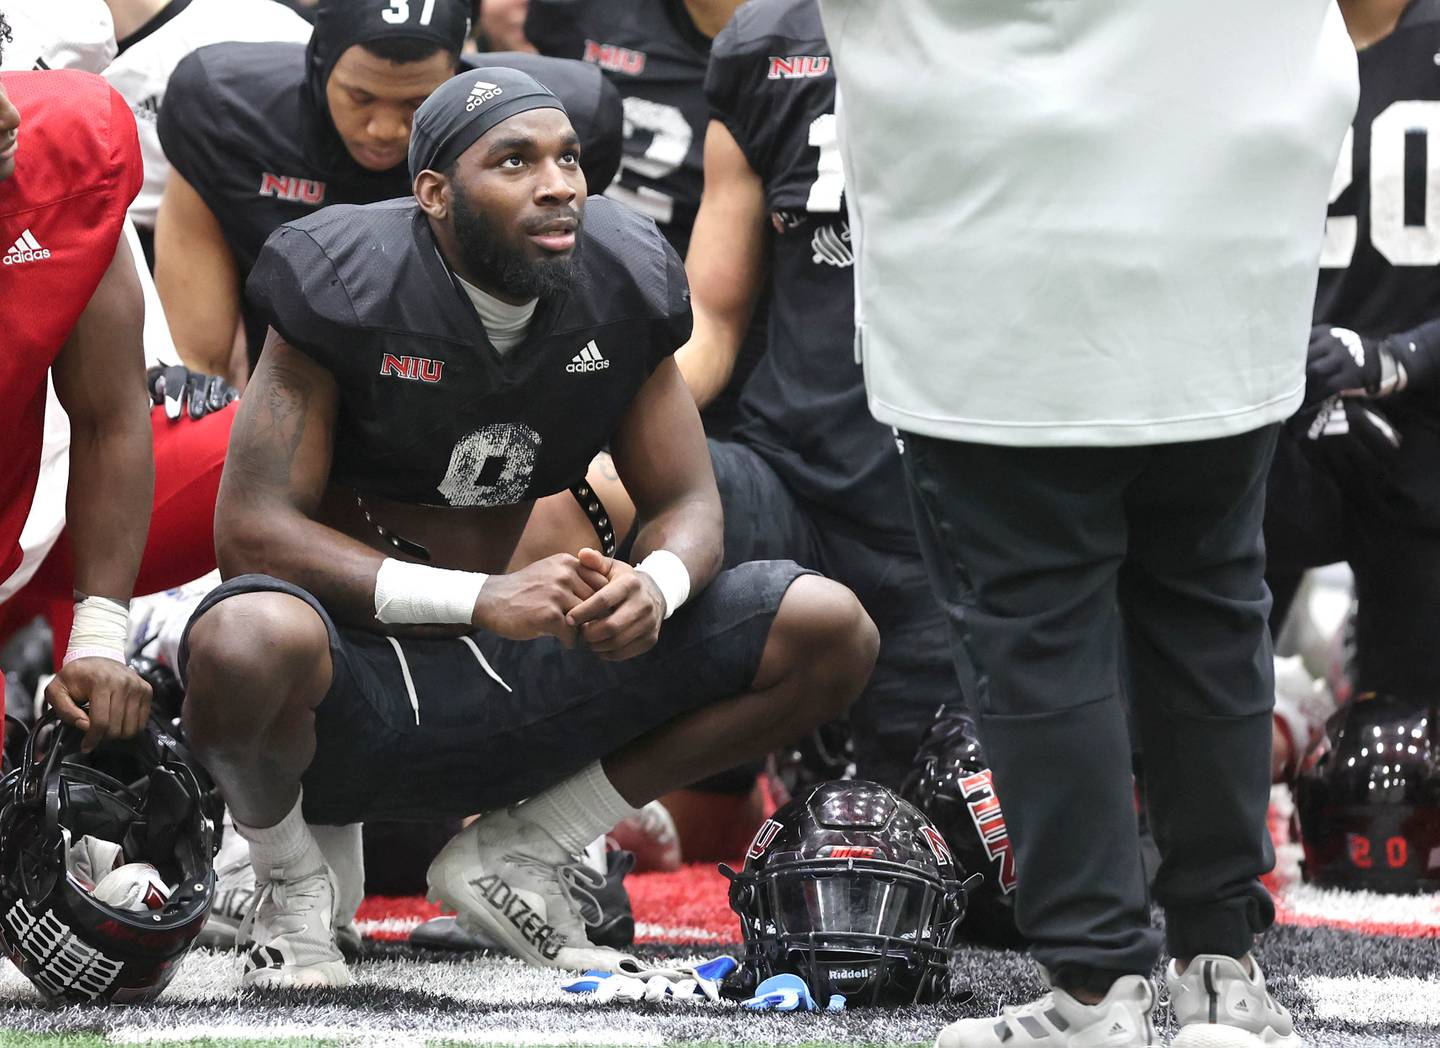 Northern Illinois University linebacker Daveren Rayner listens to head coach Thomas Hammock talk at the end of the session Wednesday, March 30, 2022, during spring practice in the Chessick Practice Center at NIU in DeKalb.